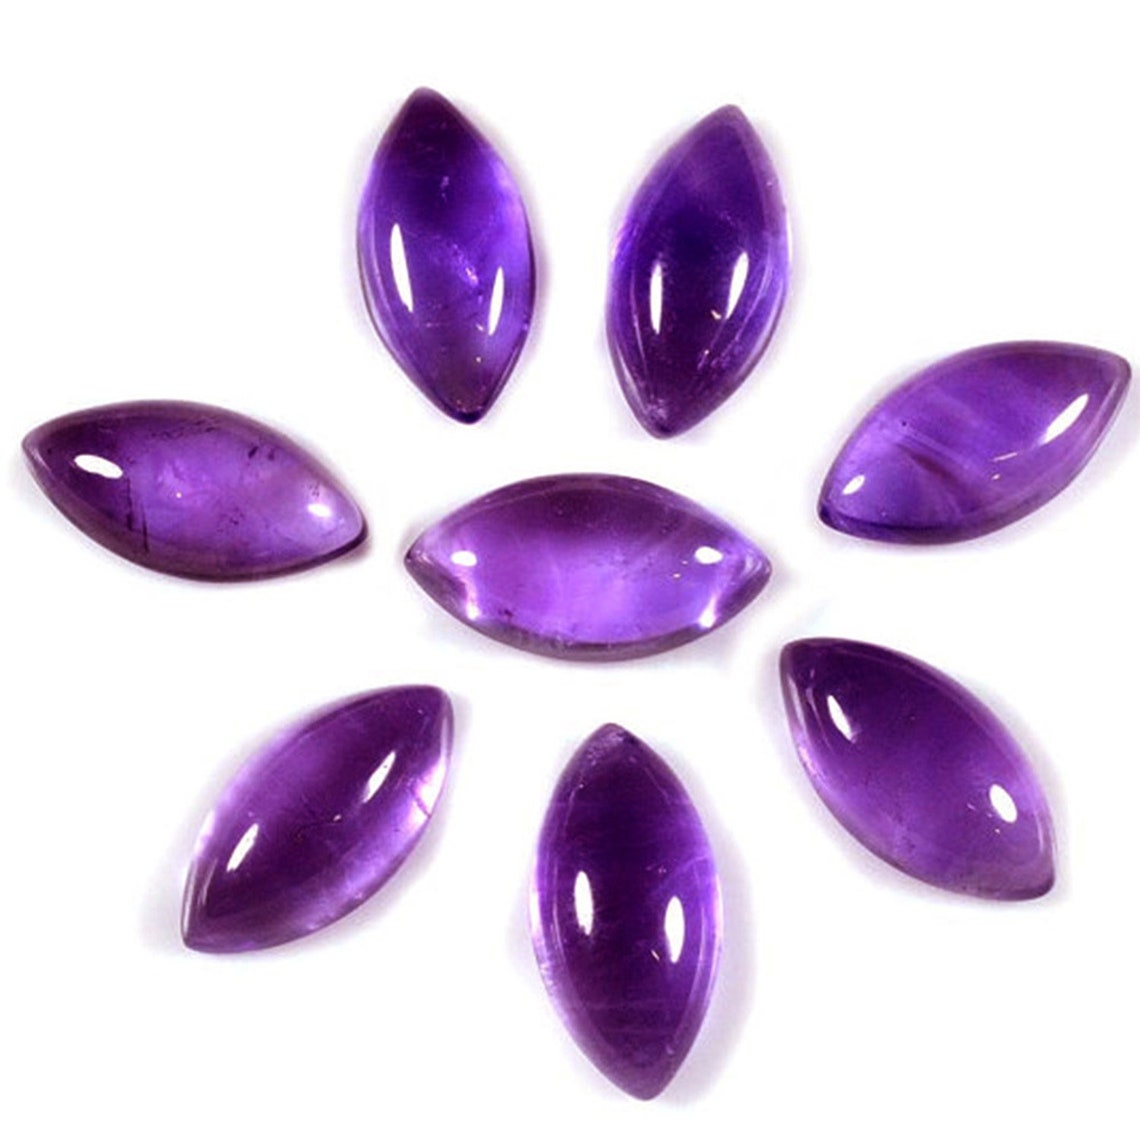 5 Pieces 7x14 Mm Marquise Natural Amethyst Cabochon Loose | Etsy